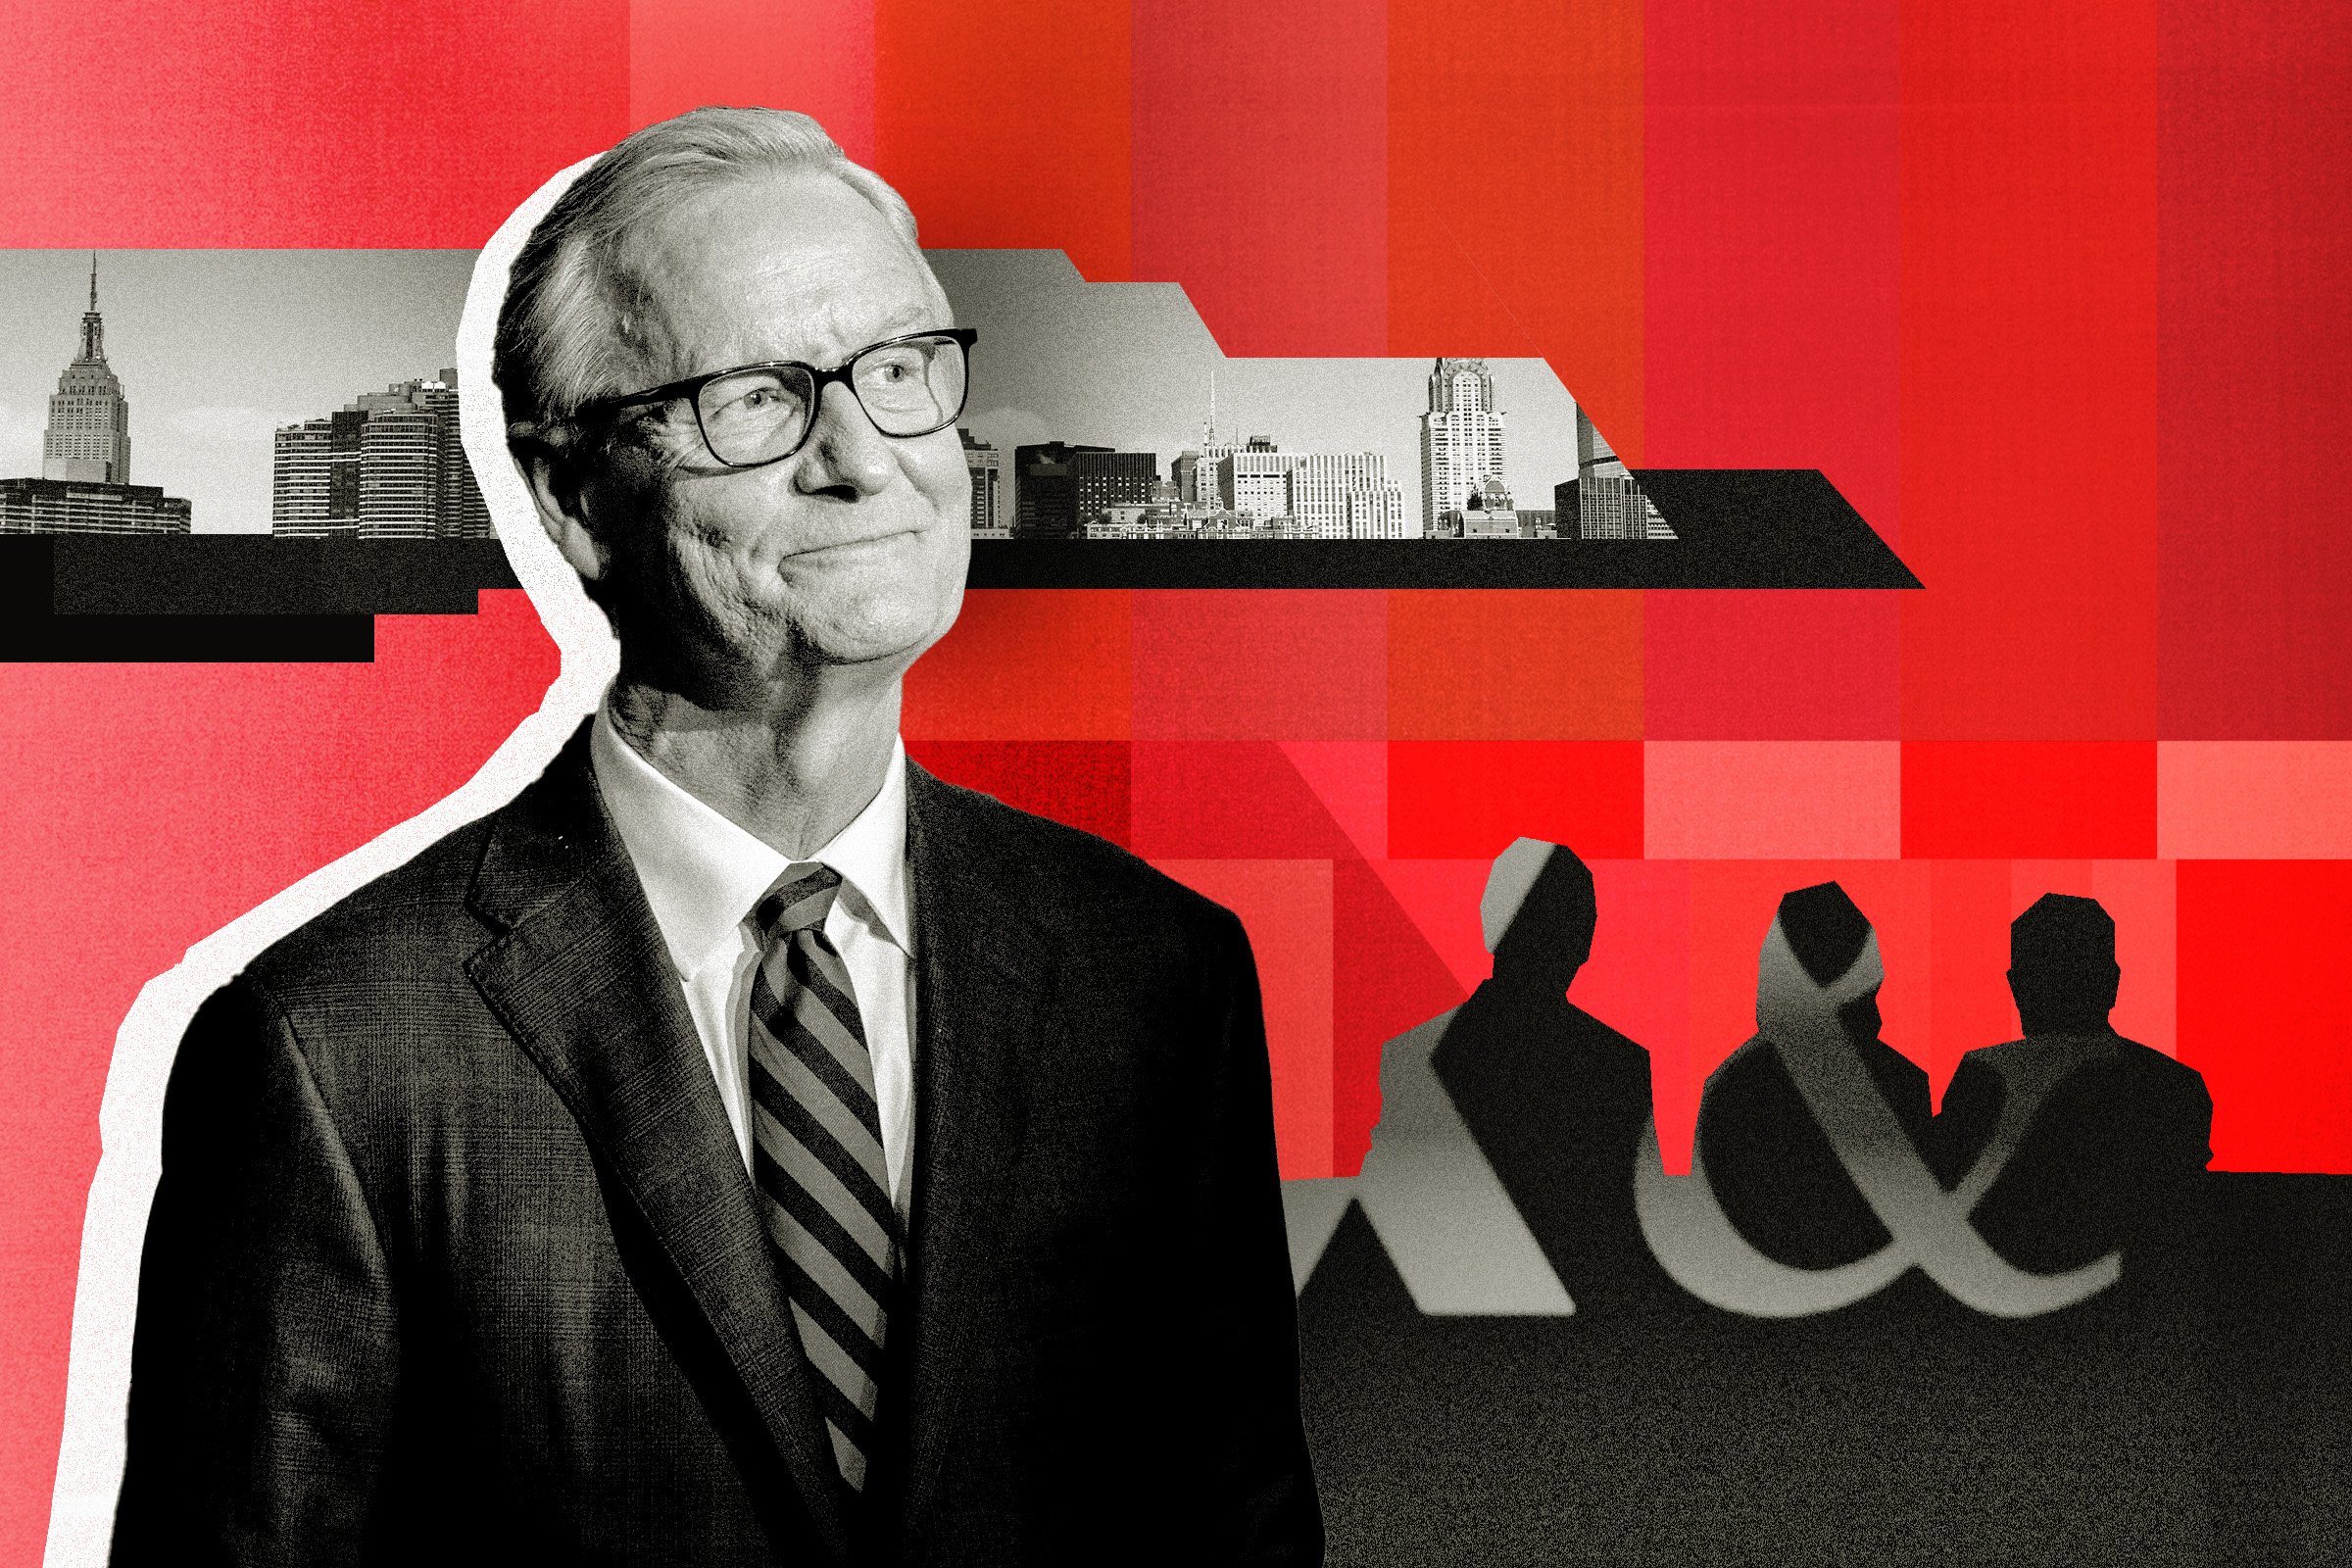 On Fox News, Steve Doocy has become the unexpected voice of dissent